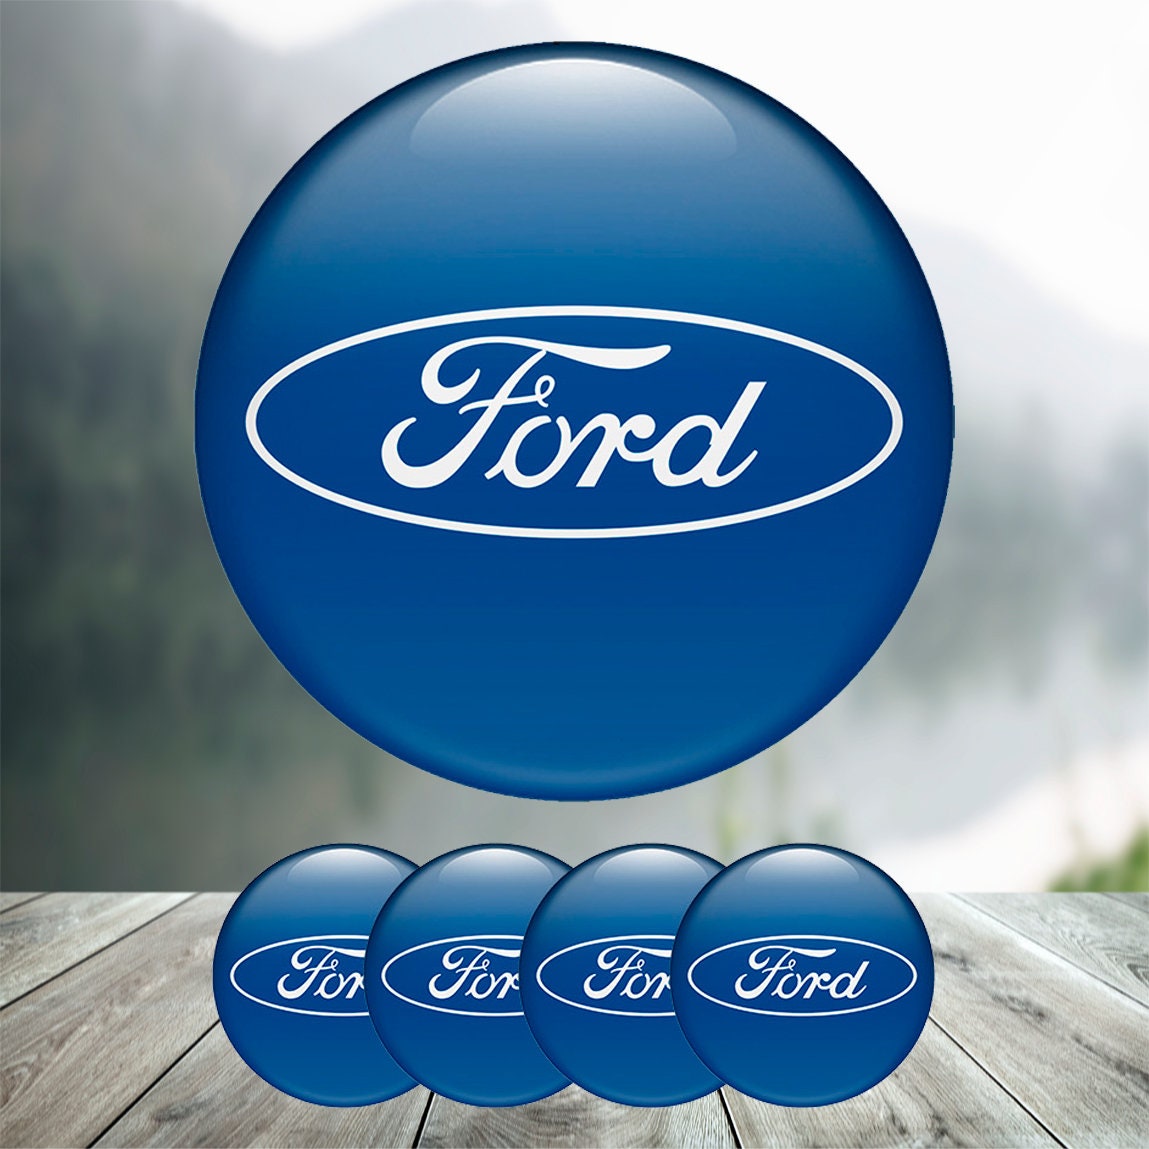 2003-13 Ford blue emblem for steering wheel and exterior